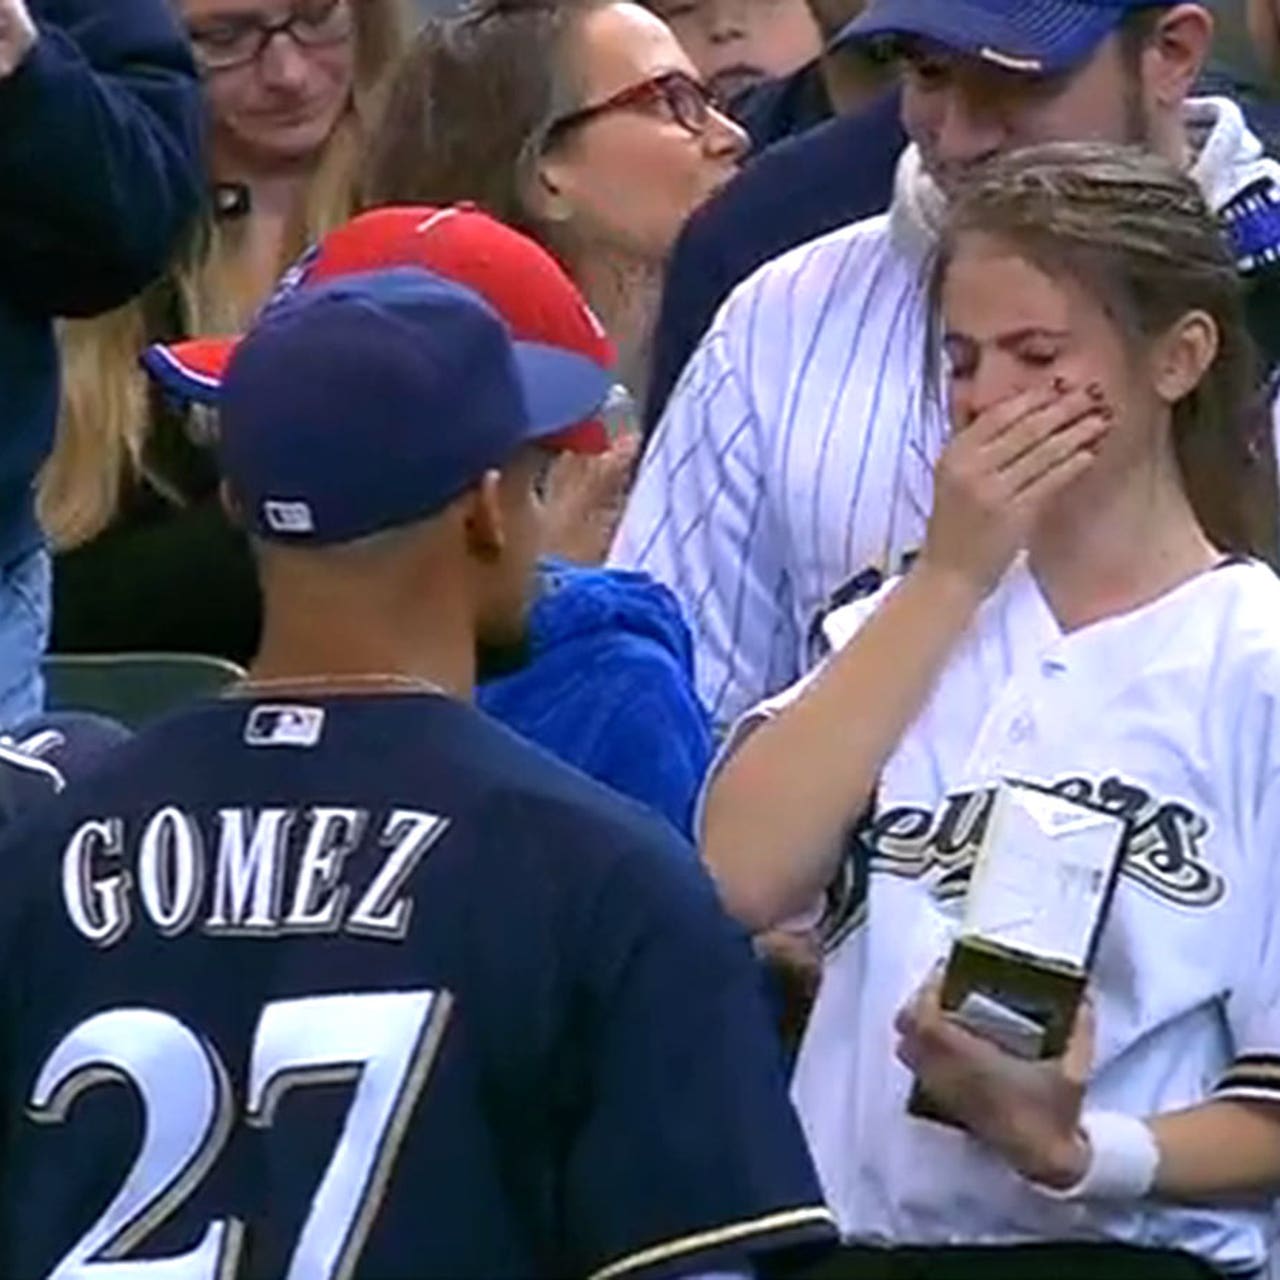 Brewers' Gomez hug before game makes young fan cry